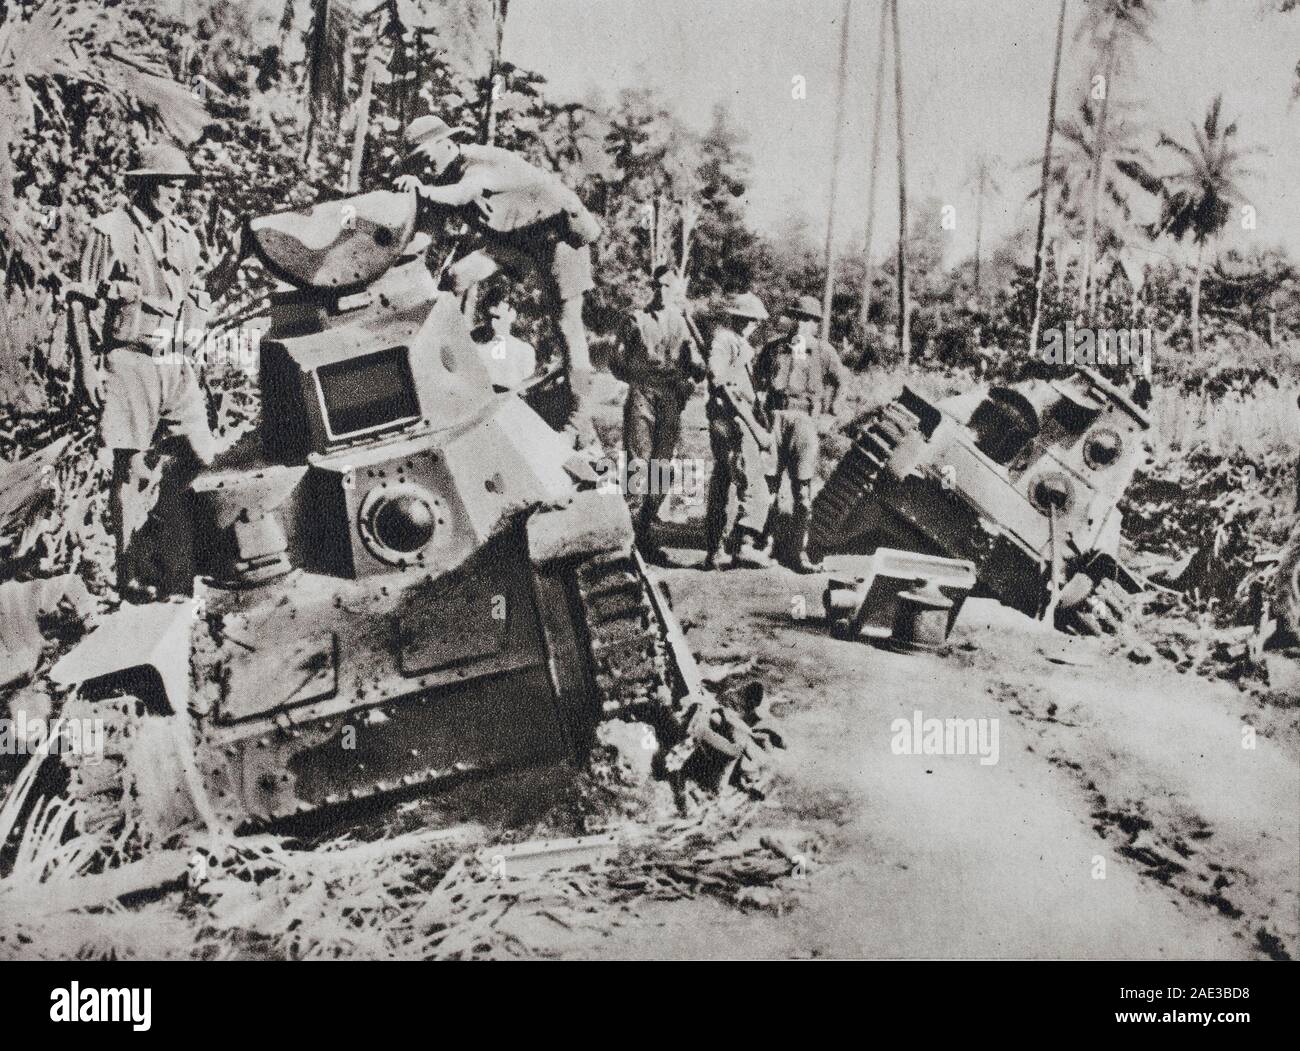 The Allies have reconquered New Guinea. The Americans and Australians inspect the Japanese tanks, which were put out of use during the fierce fighting Stock Photo